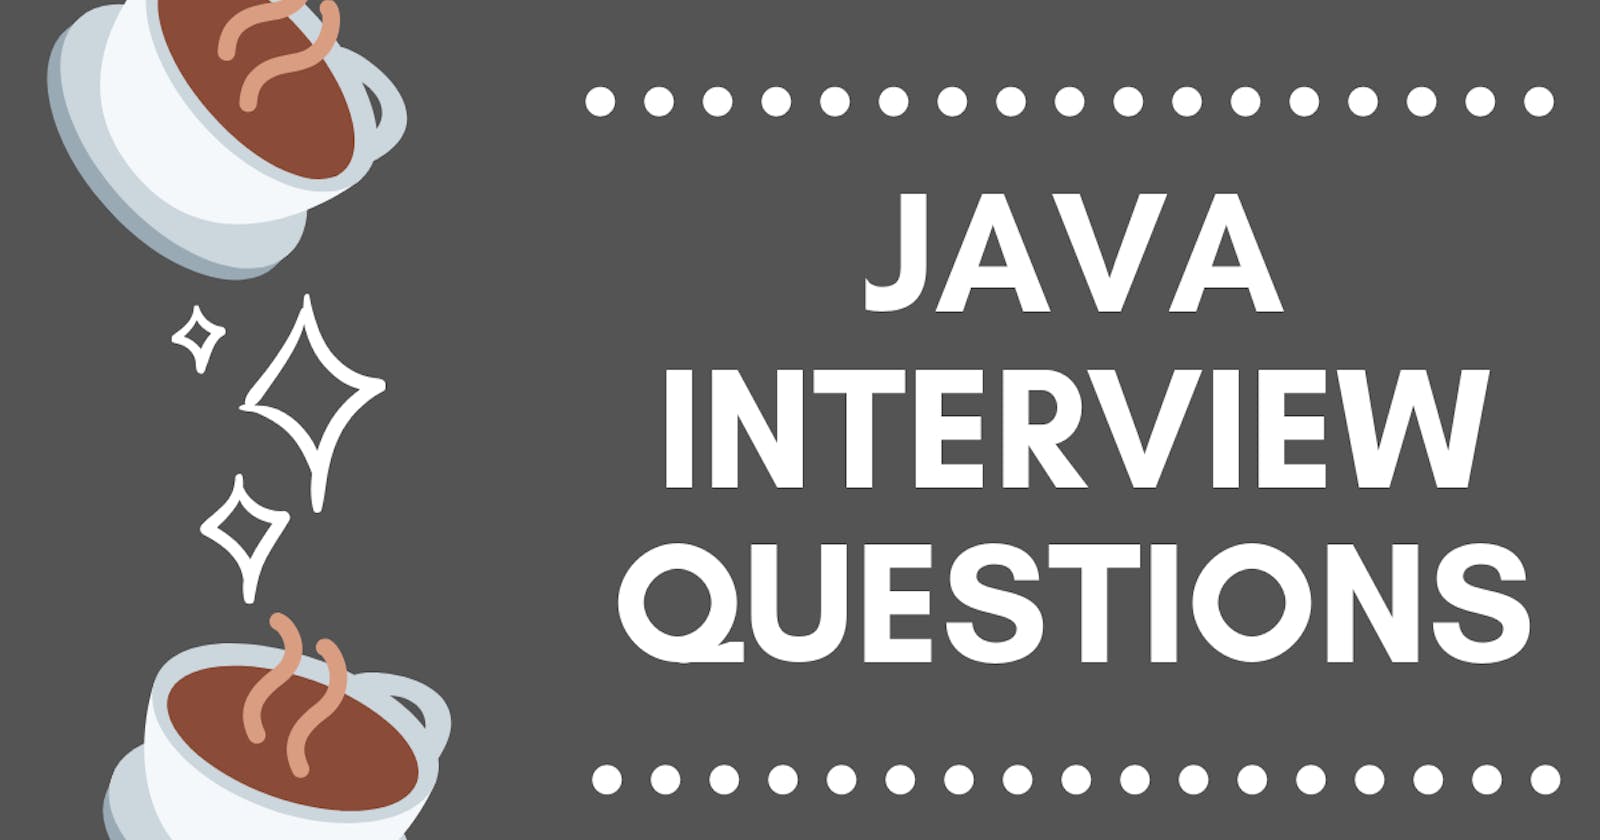 How well do you know Java?